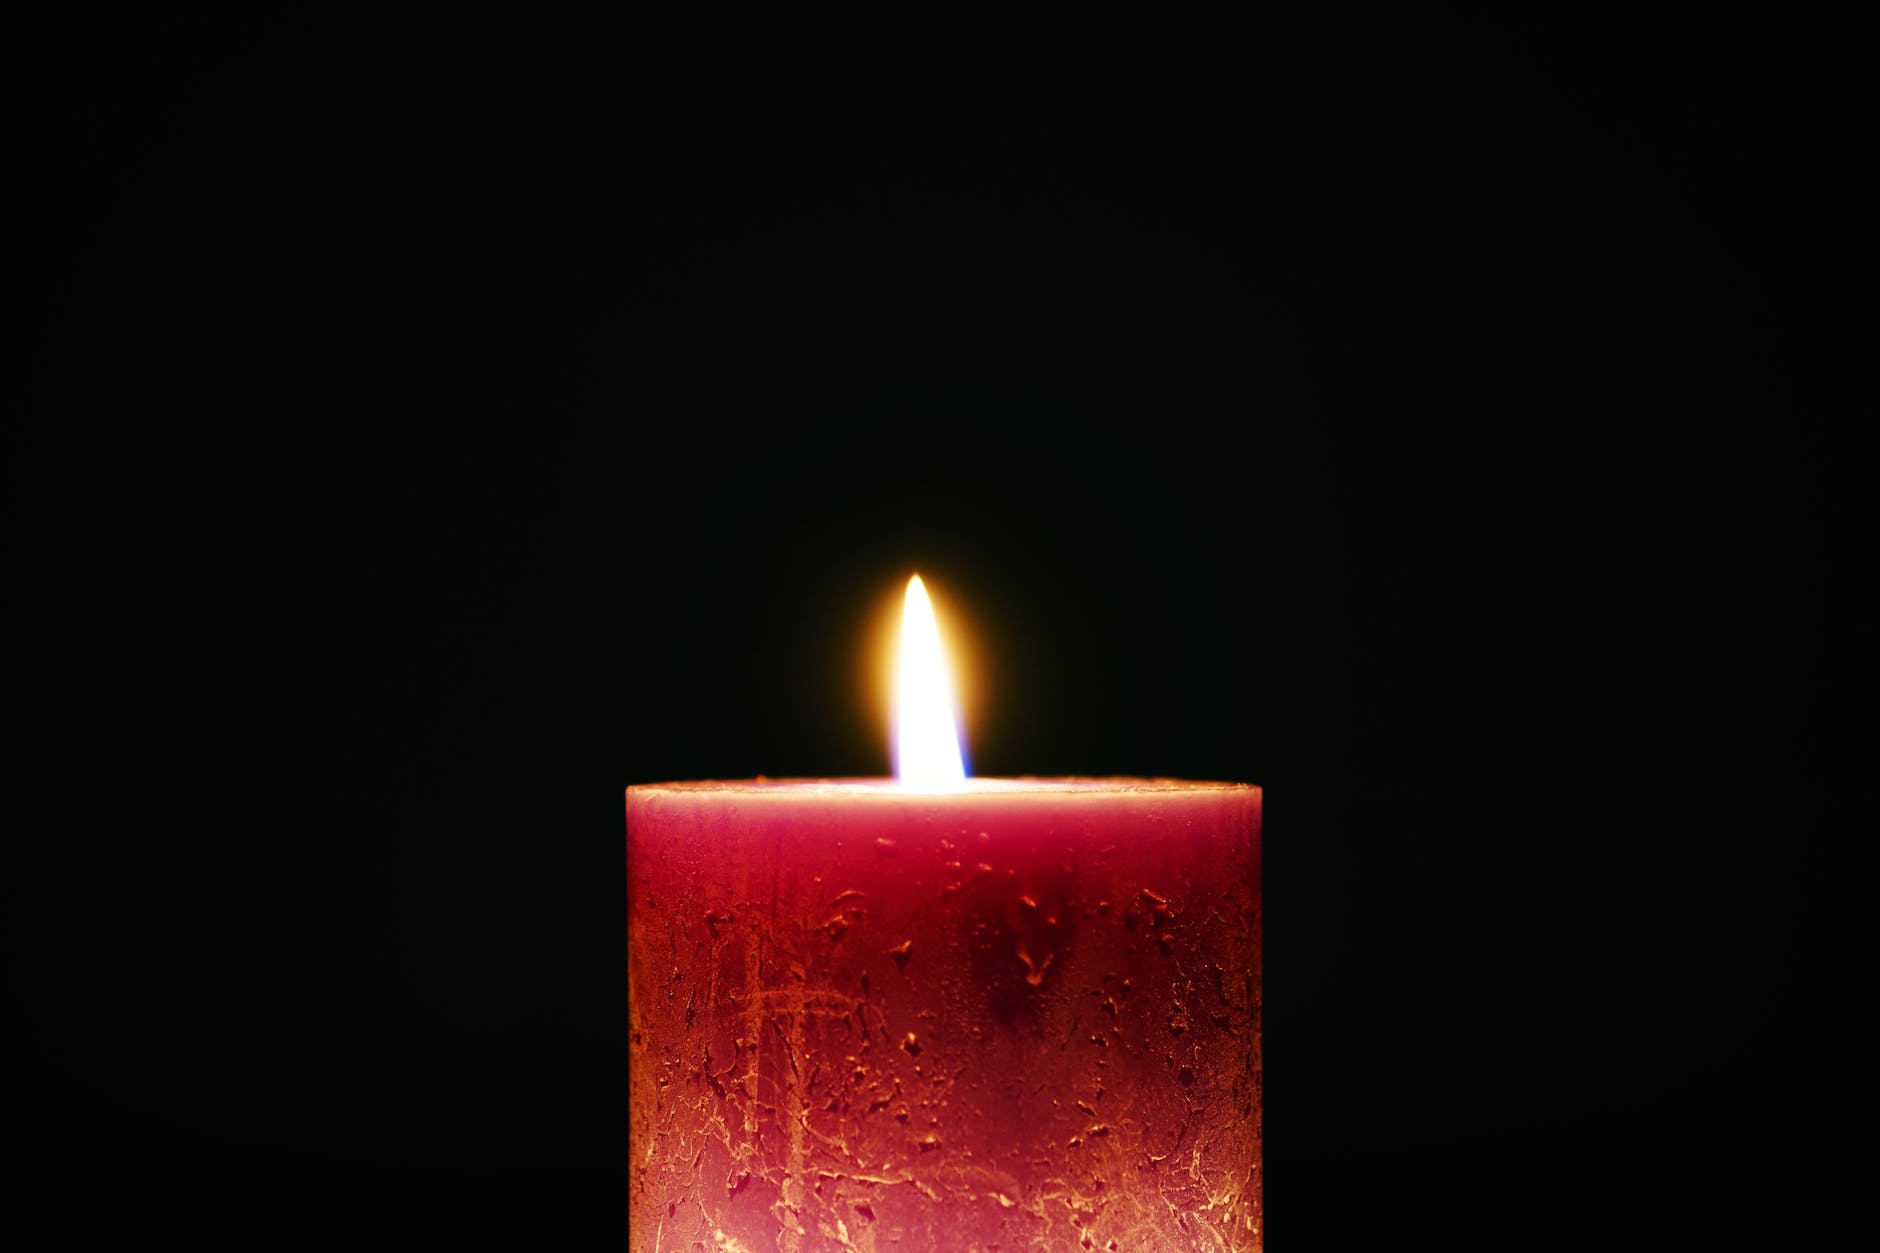 Red candle, white flame, black background--signifying our dreams

